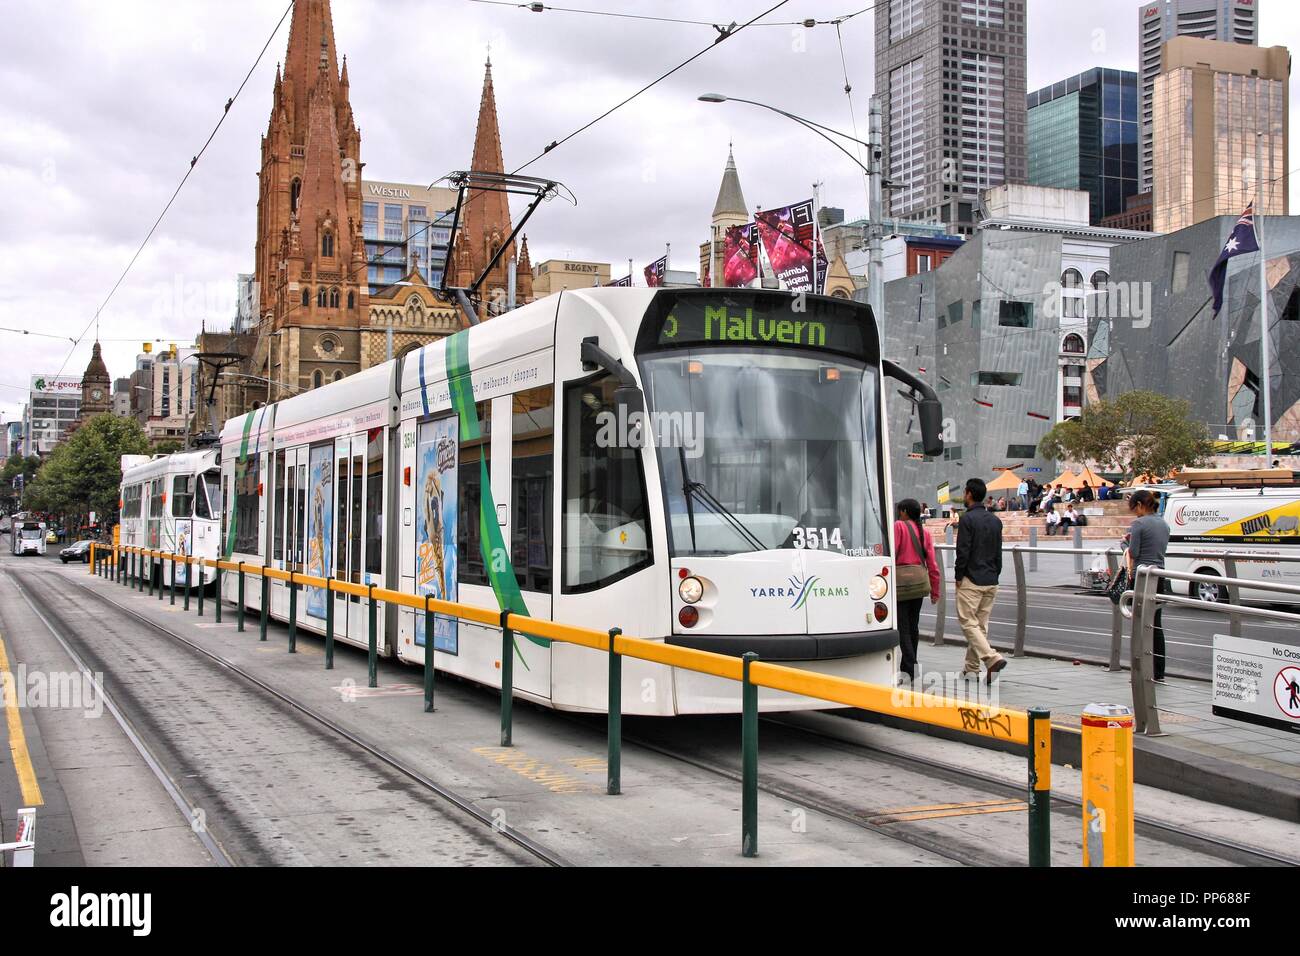 MELBOURNE, AUSTRALIA - FEBRUARY 9: People board Yarra Tram on February 9, 2008 in Melbourne, Australia. Yarra Trams served 158 million rides in 2008.  Stock Photo